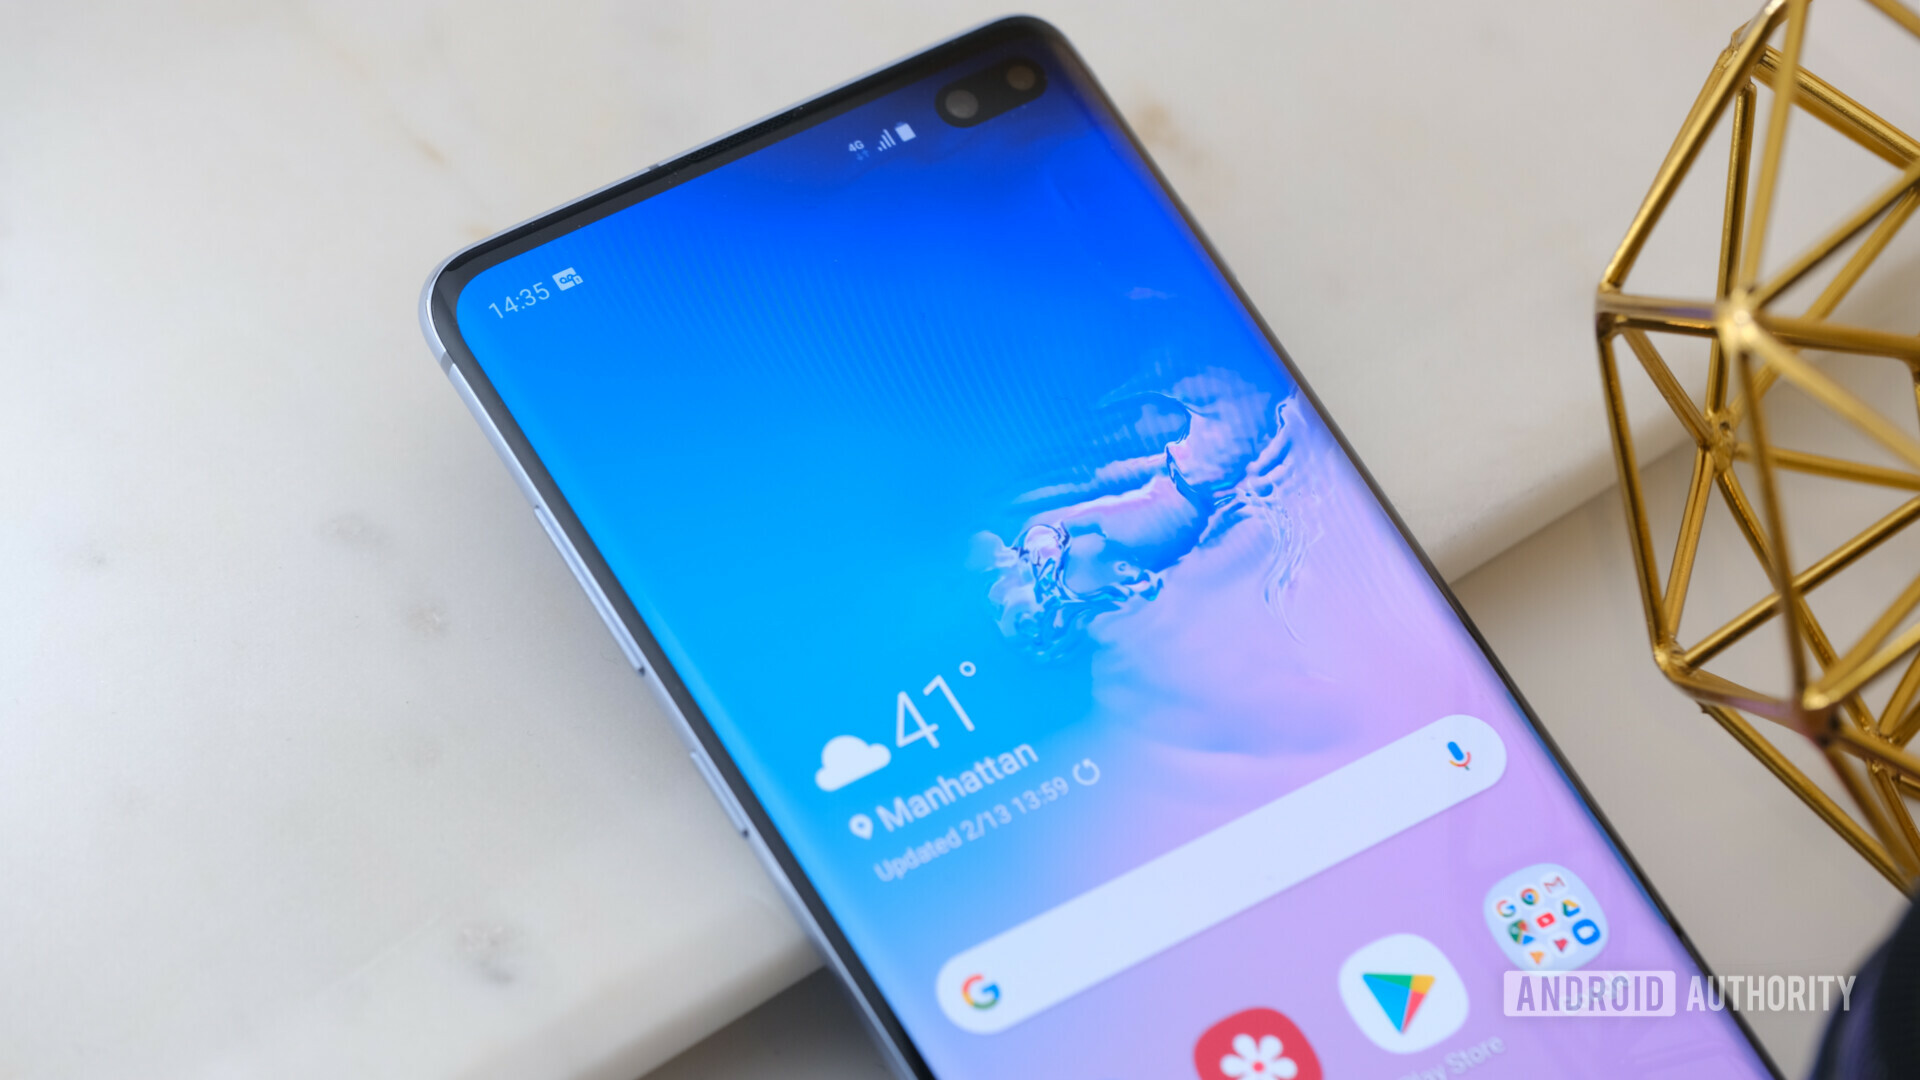 Front side of the Samsung Galaxy S10 Plus showing the default home screen.